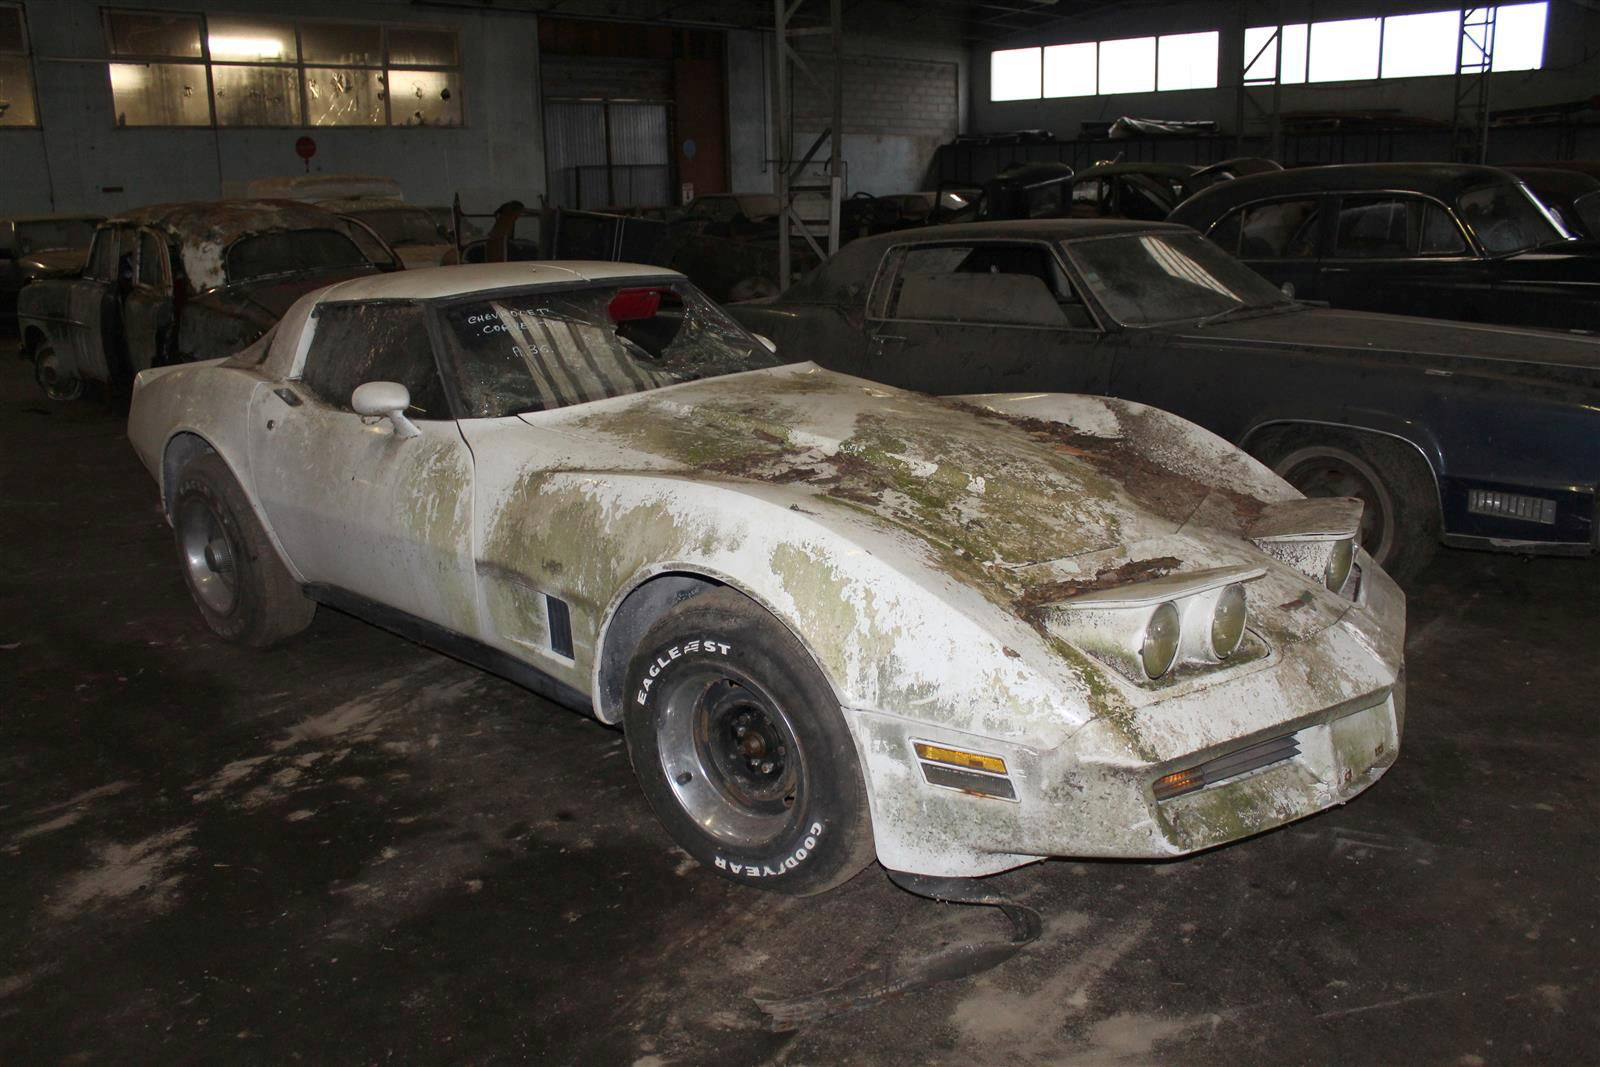 Incredible 81-car French barn-find includes a Miura